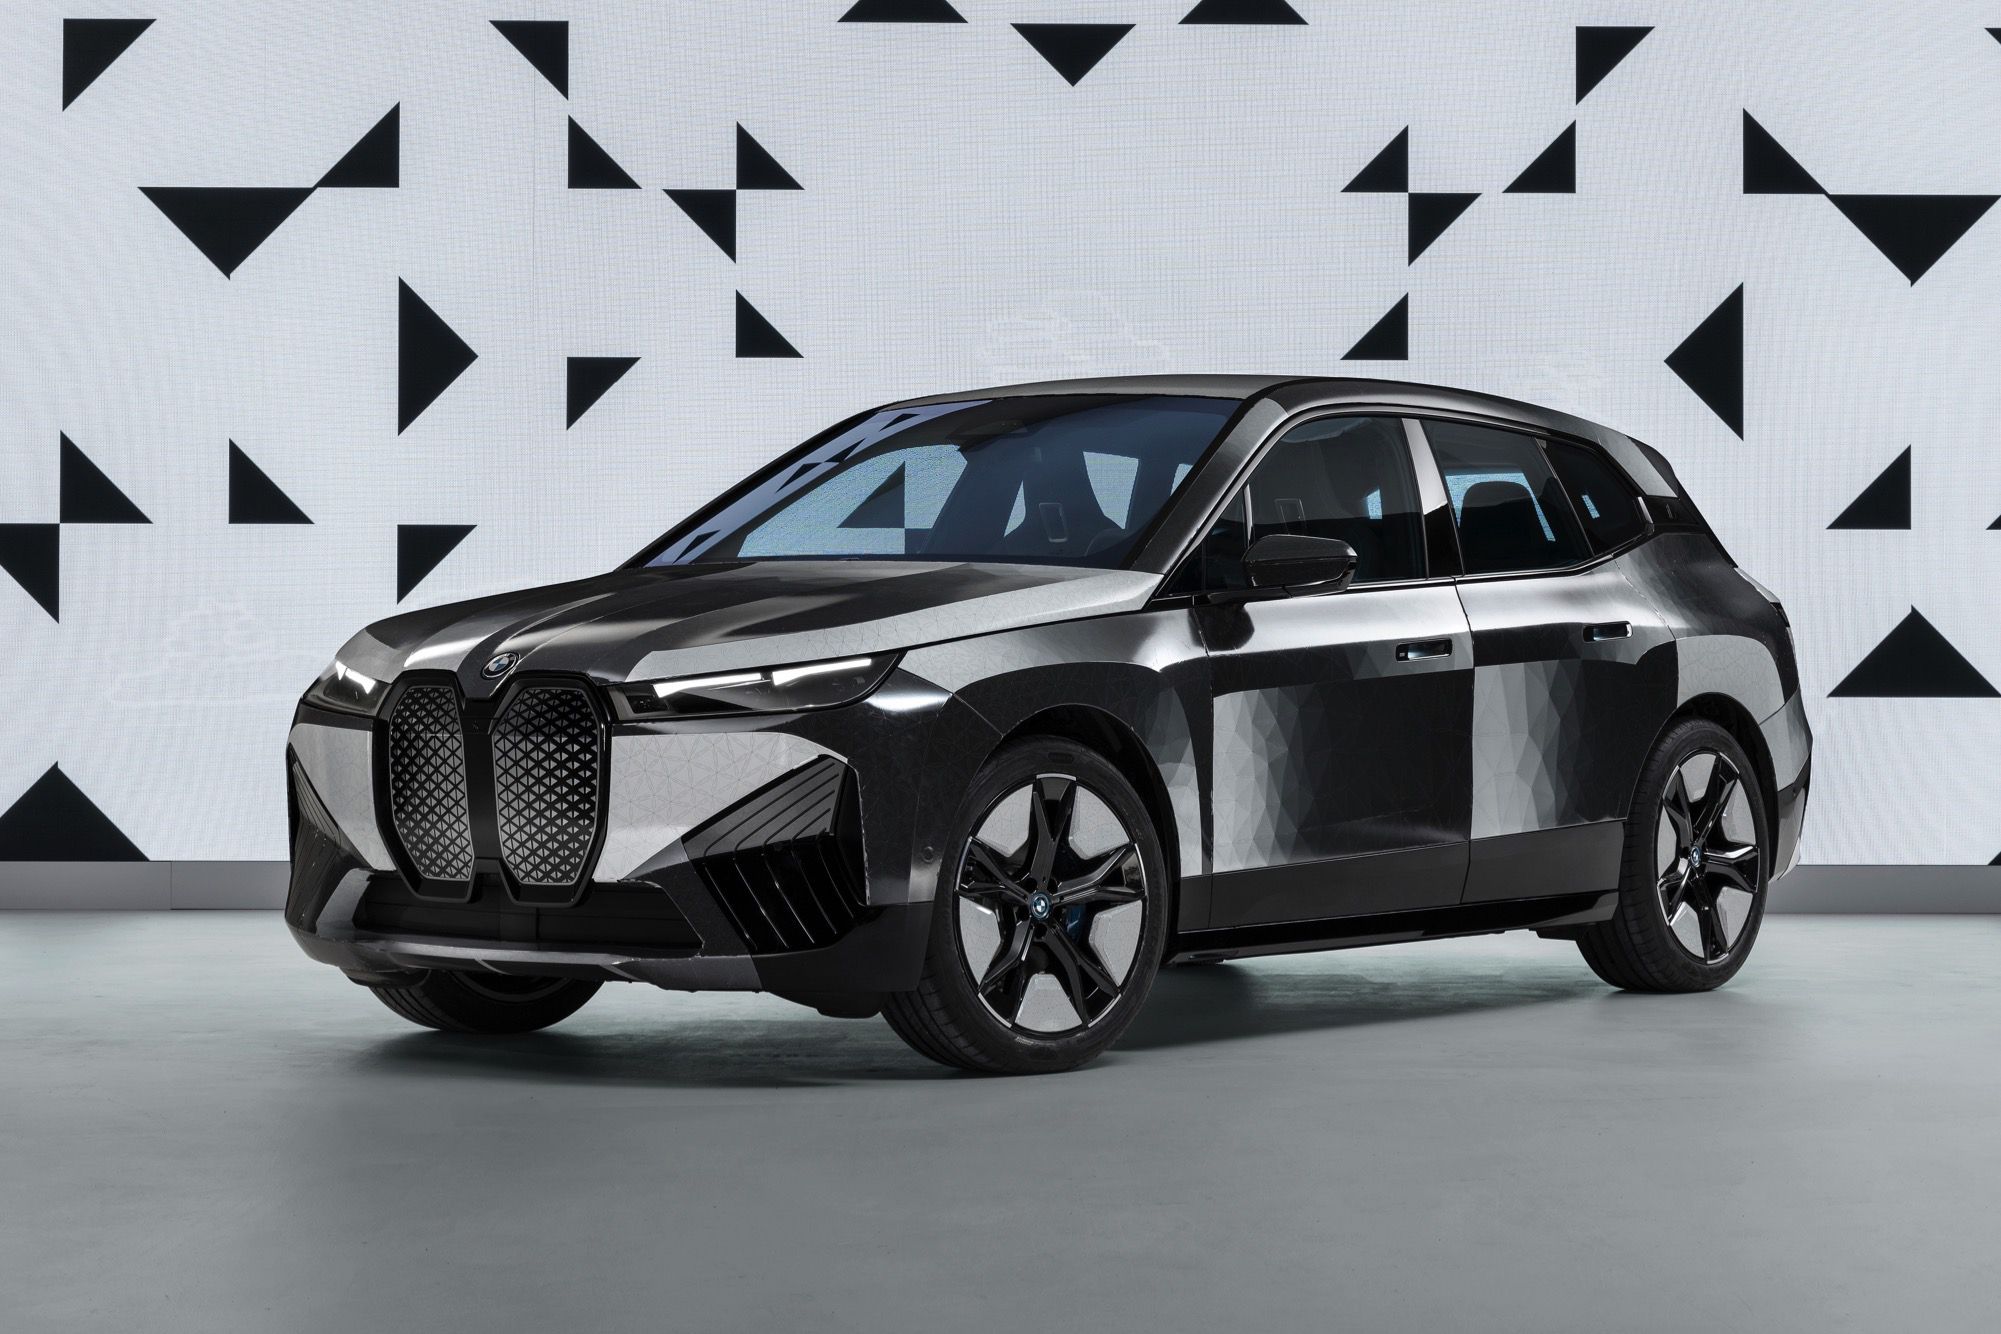 BMW Introduces a Car That Changes Colors. Why?